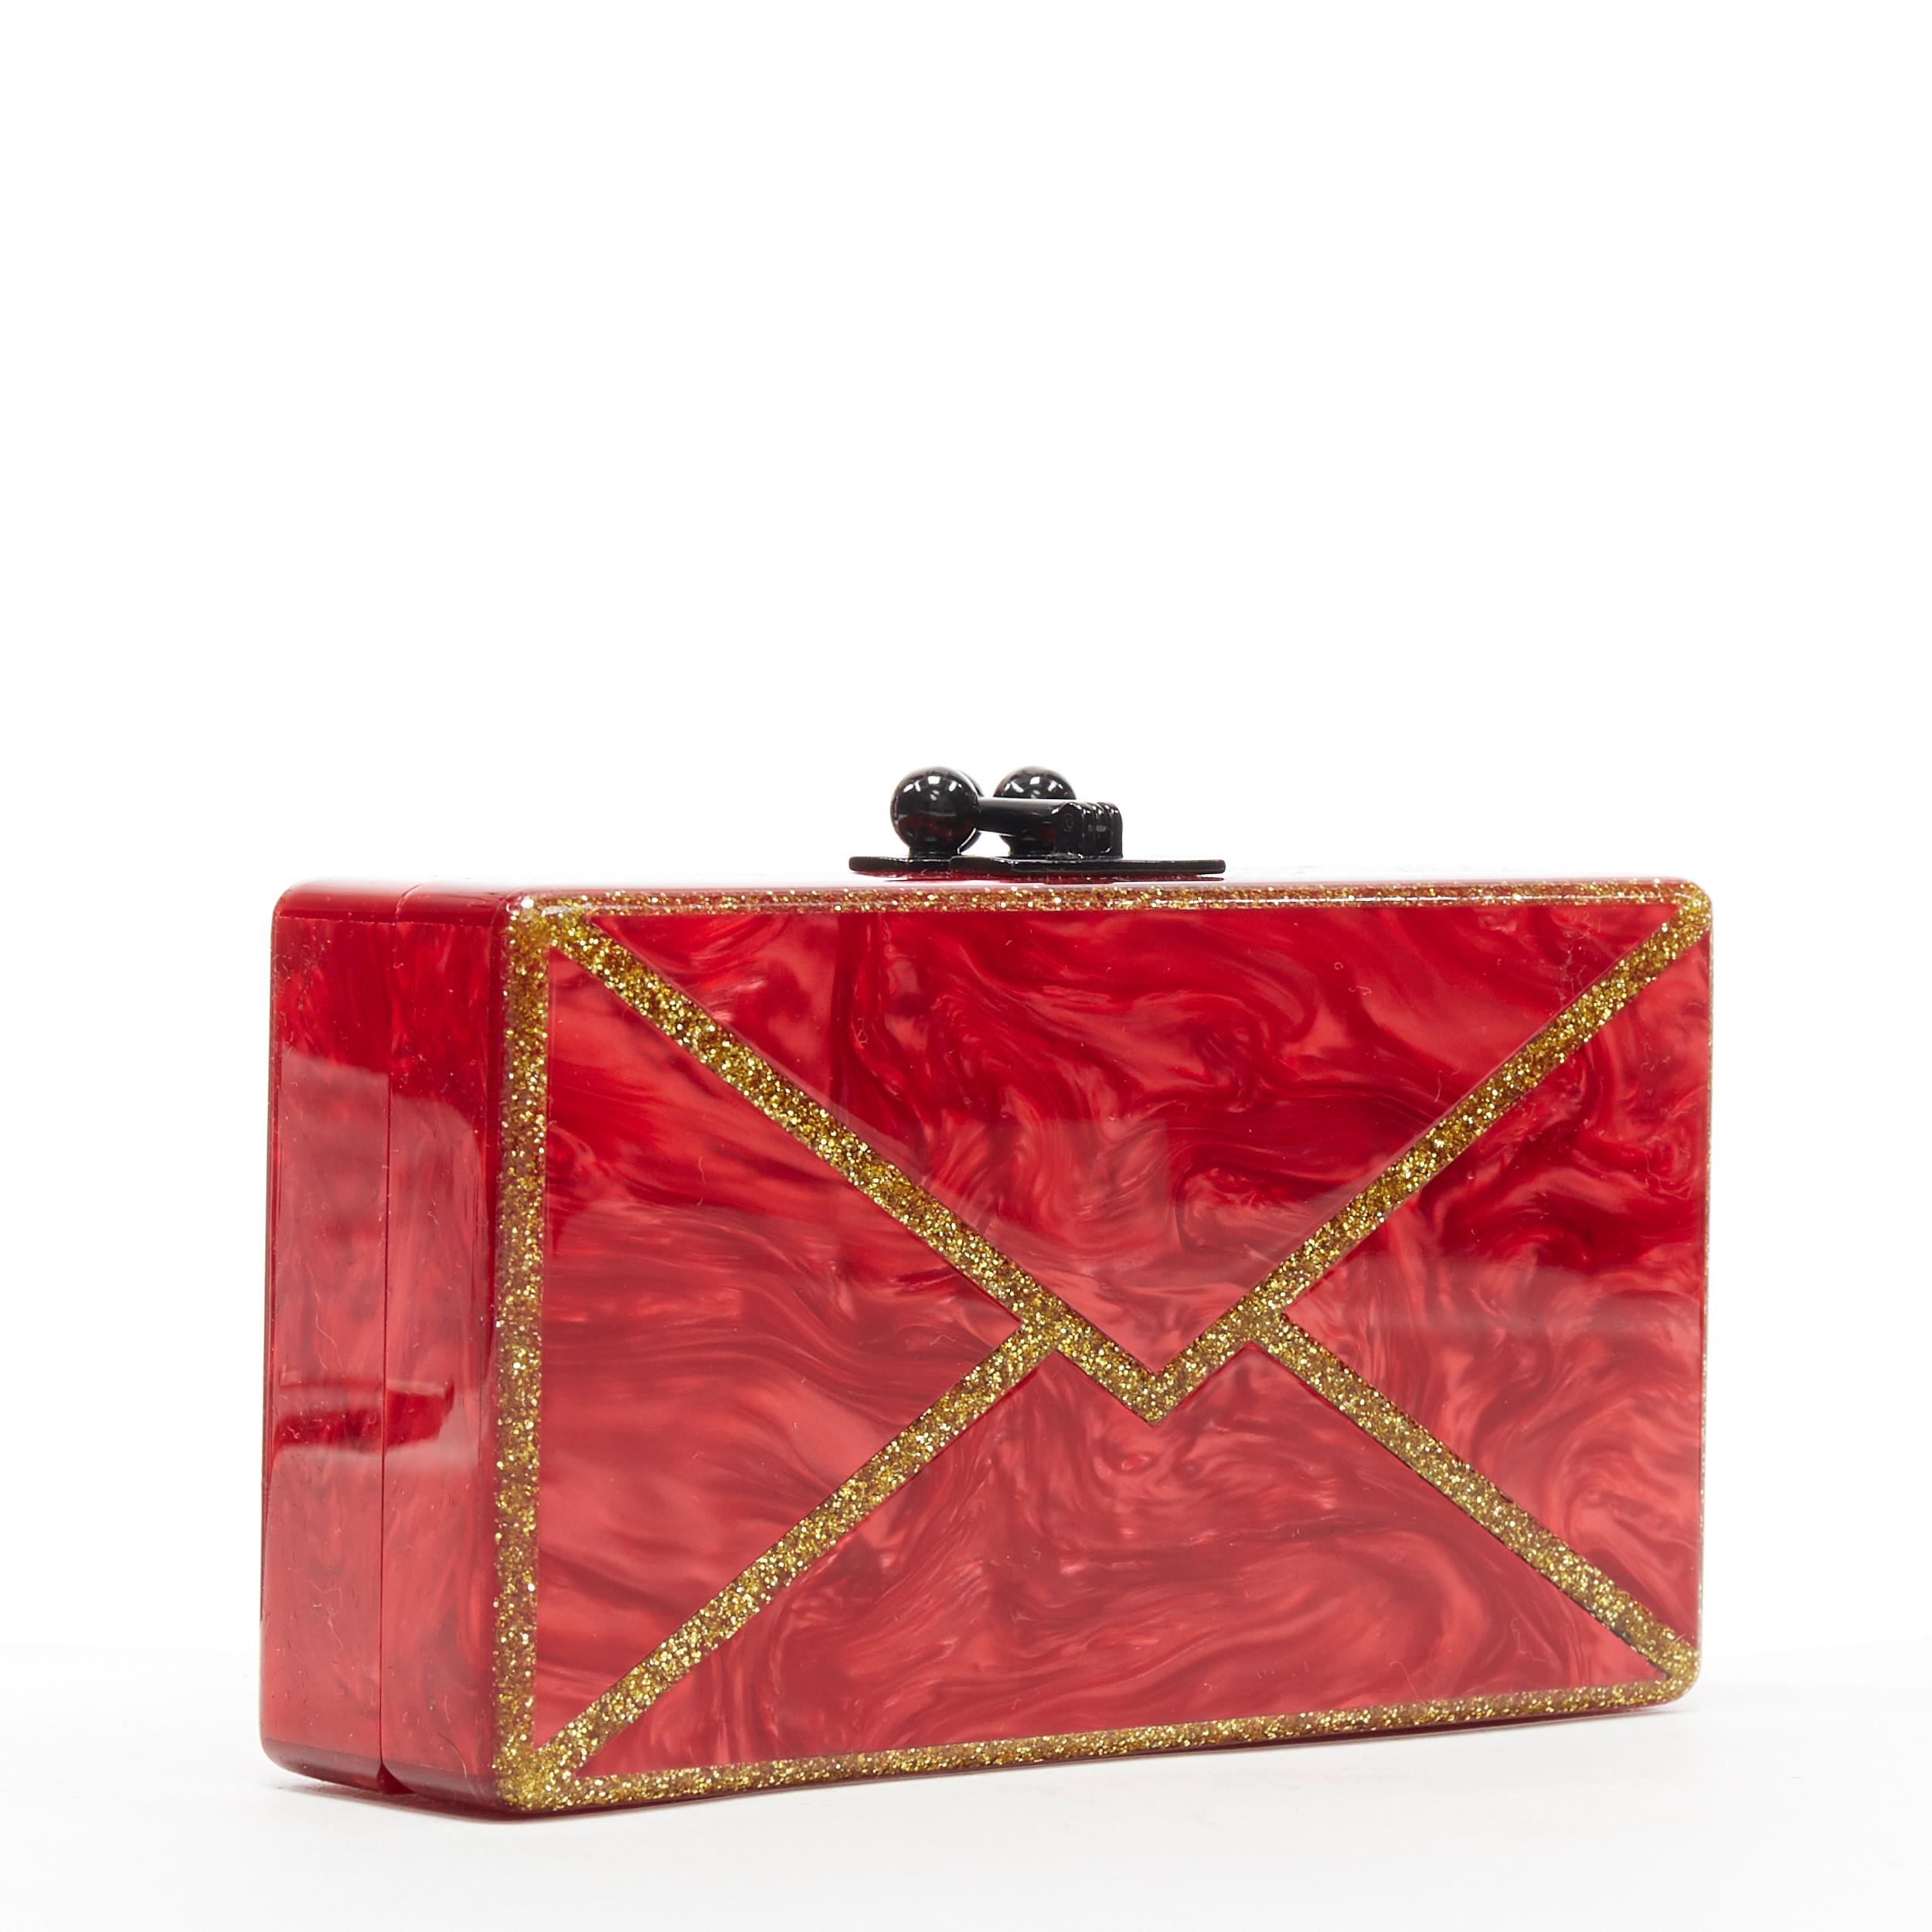 new EDIE PARKER Jean red gold glitter envelope rectangular box clutch bag
Brand: Edie Parker
Designer: Edie Parker
Model Name / Style: Box clutch
Material: Acrylic
Color: Red
Pattern: Solid
Closure: Clasp
Extra Detail:

CONDITION: 
Condition: New